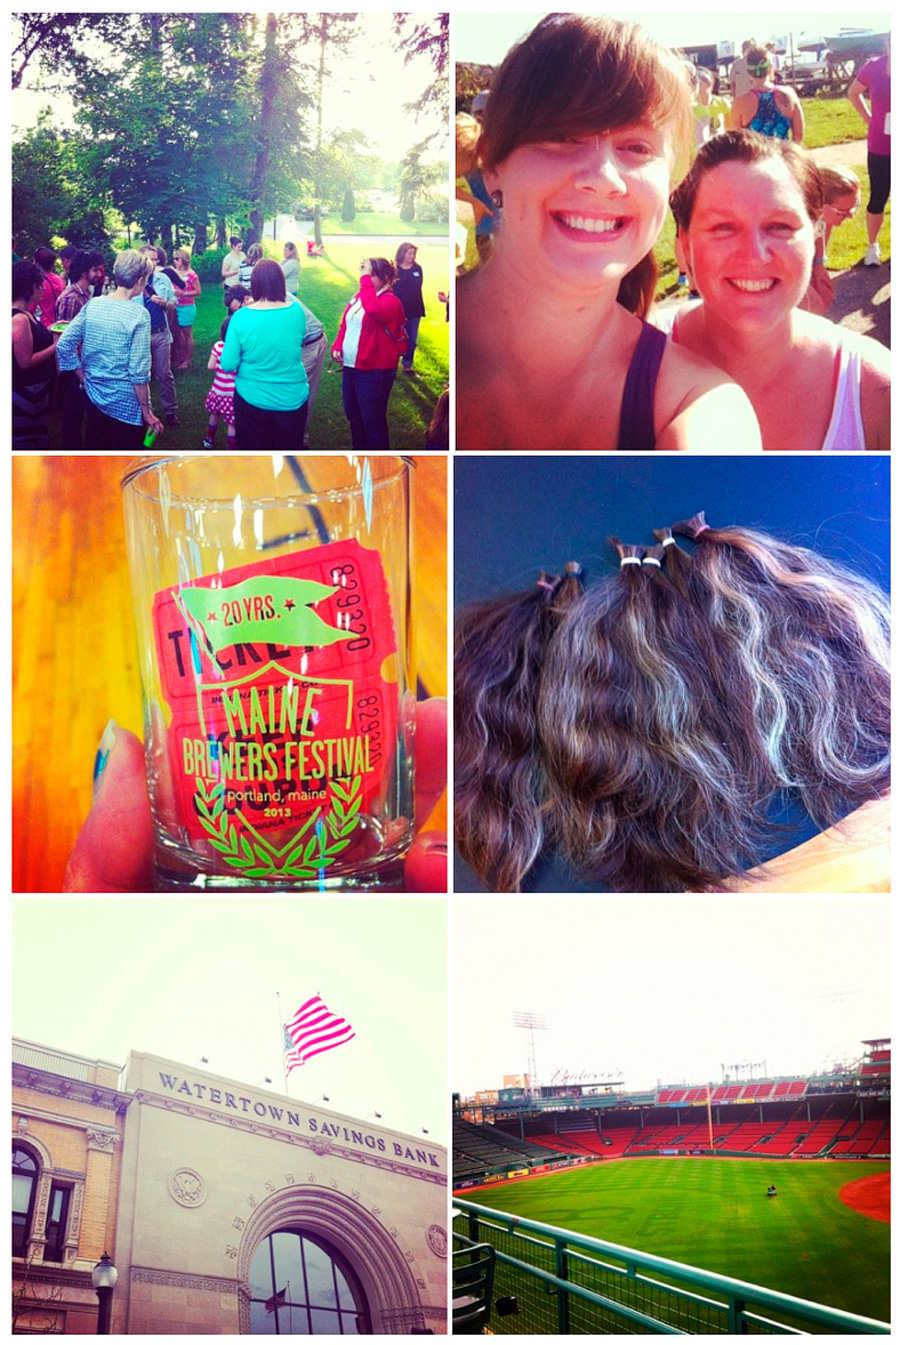 I hosted a big photographer BBQ at our house (so fun), ran my first 5K (ok, I walked half of it, but still), attended the Maine Brewers Festival (I preferred the food), got a HUGE haircut, visited Watertown the day after the bomber was found, and got a private tour of Fenway for an engagement session!